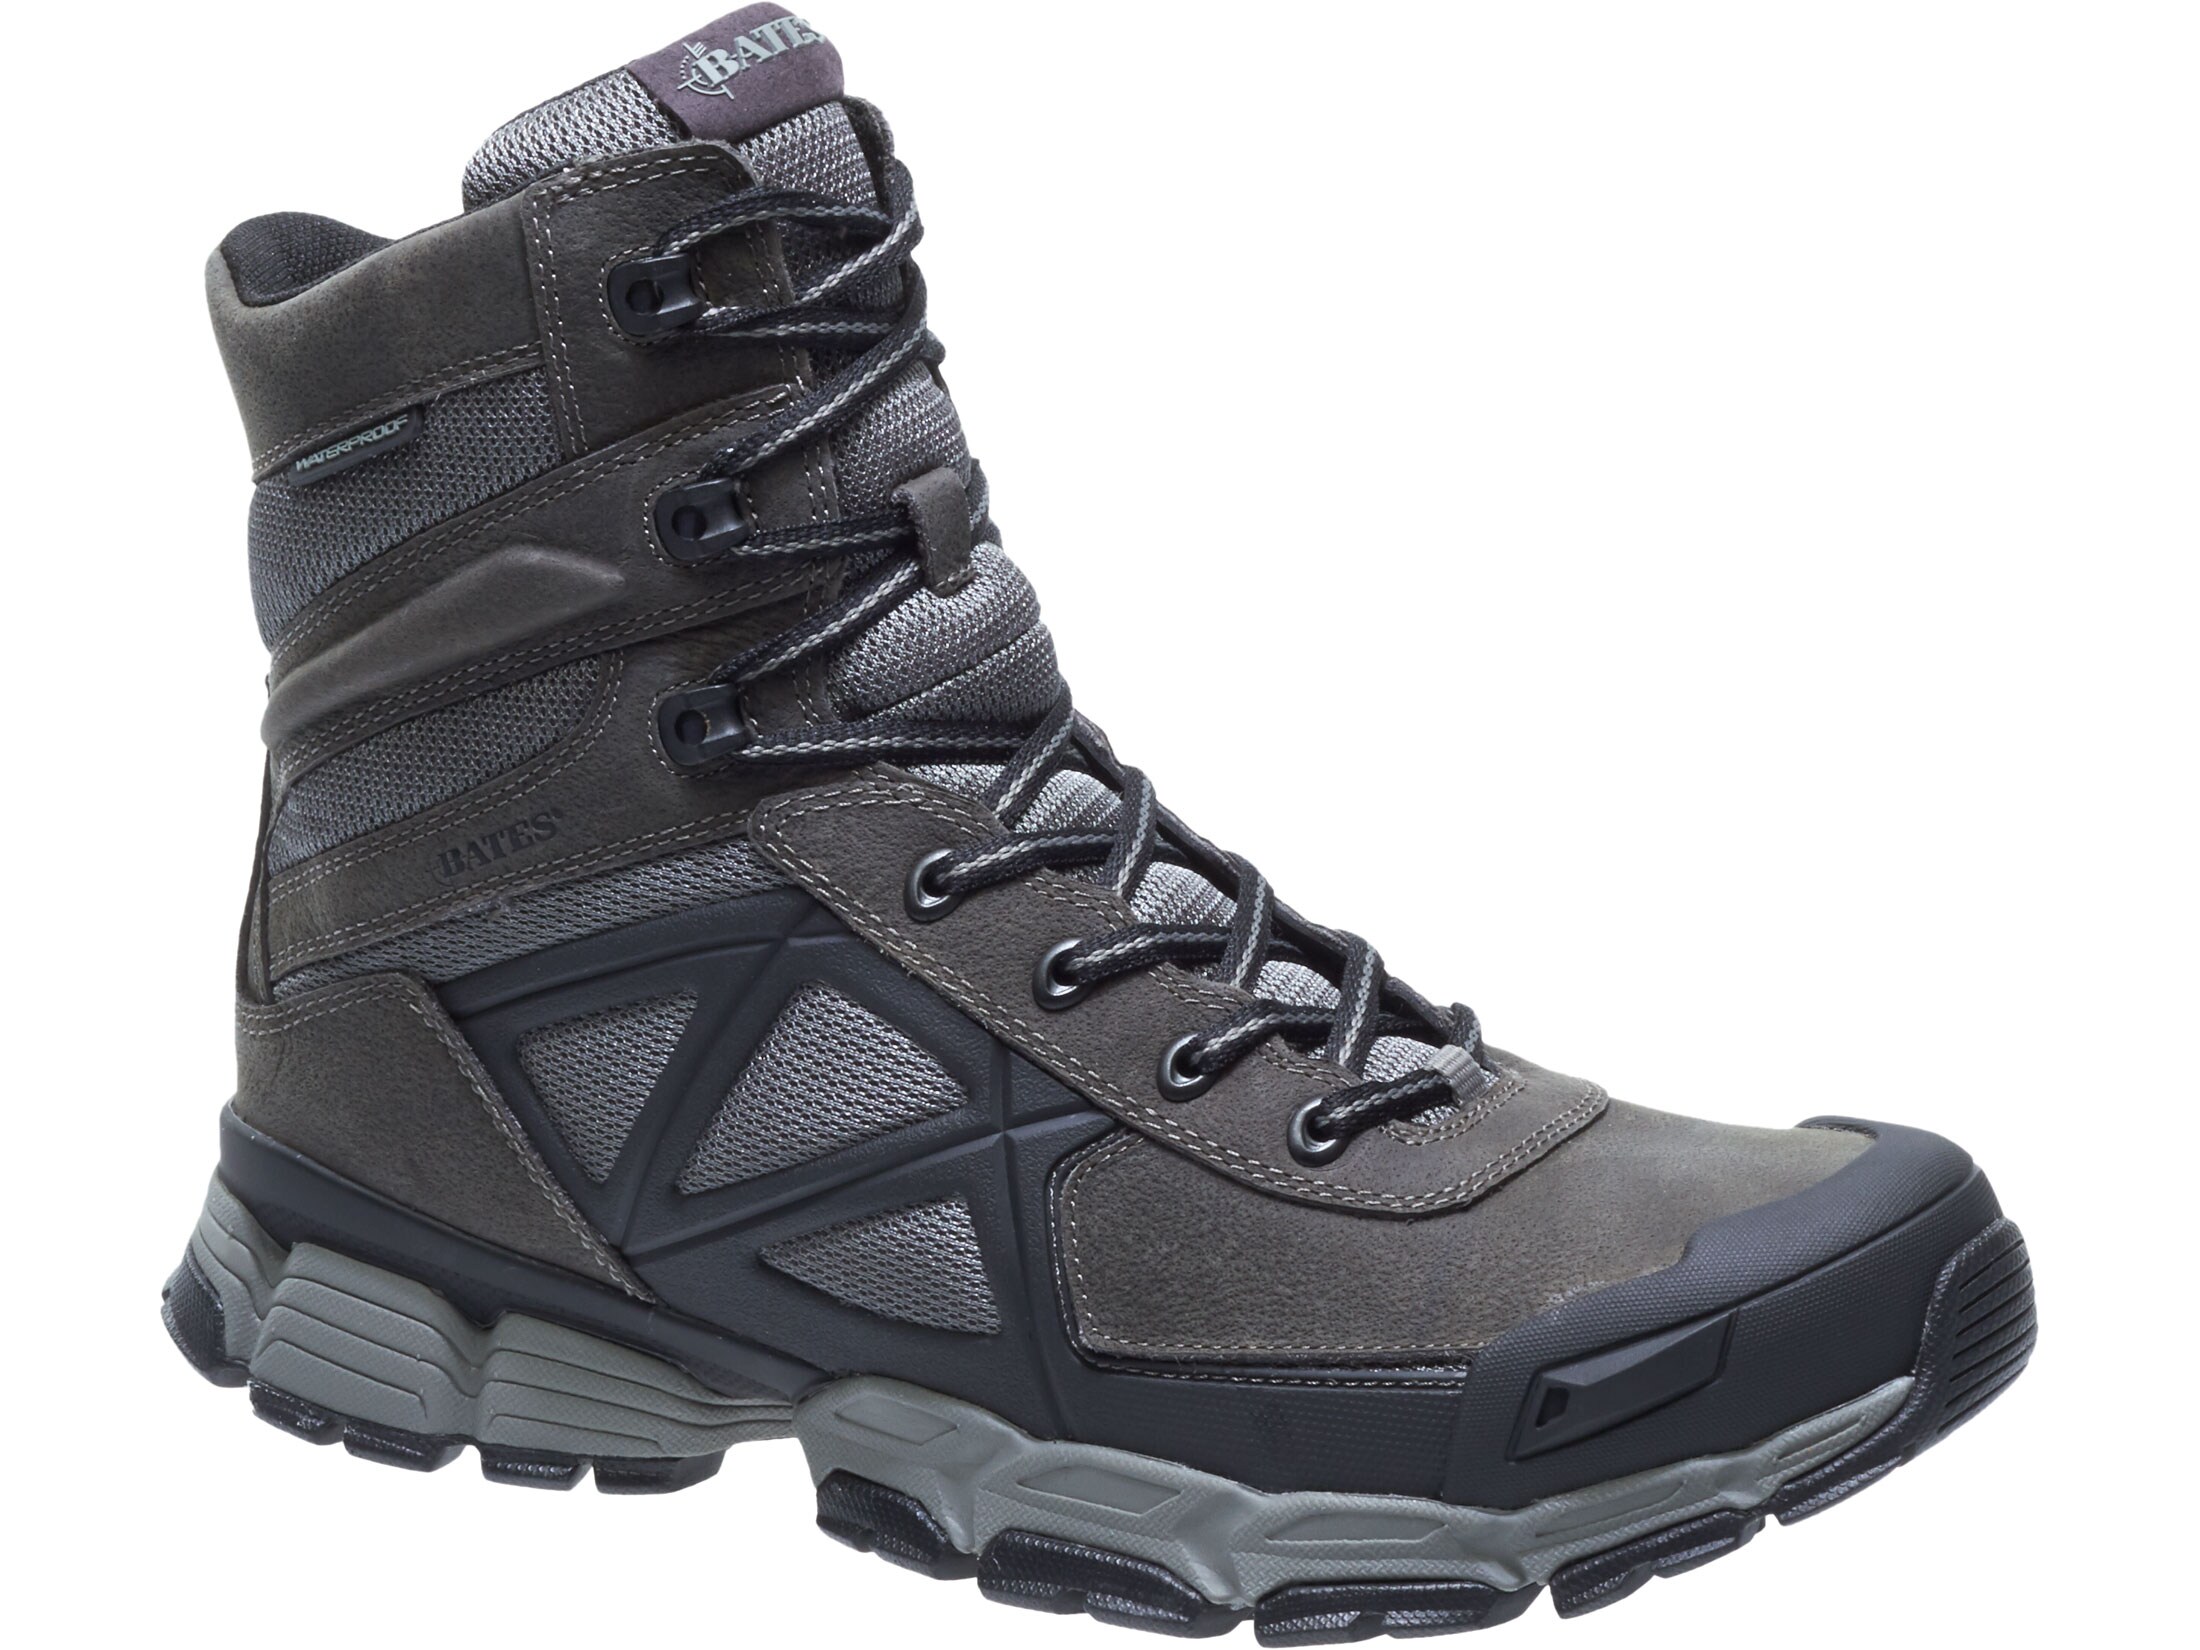 Bates Velocitor FX 7 Waterproof Tactical Boots Leather/Nylon Dark